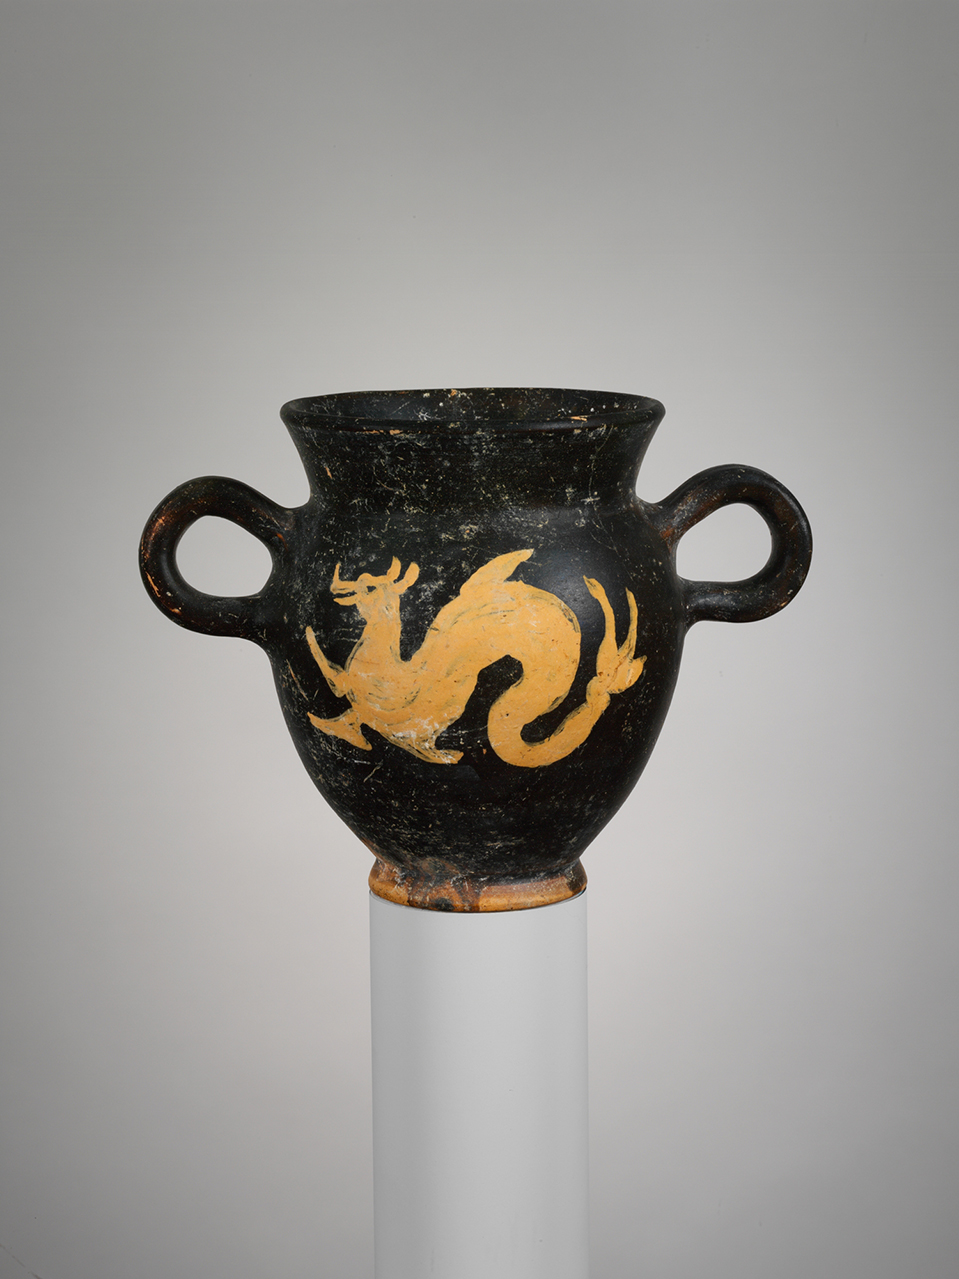 http://www.metmuseum.org/art/collection/search/255162 Etruscan, Terracotta kantharos (drinking cup), late 4th century B.C., Terracotta, Overall: 5 1/16 x 6 7/8in. (12.9 x 17.4cm); diameter of lip  3 7/8in. (9.9cm); diameter of body  4 5/16in. (10.9cm); diameter of foot  2 1/4in. (5.8cm). The Metropolitan Museum of Art, New York. Rogers Fund, 1964 (64.11.6)